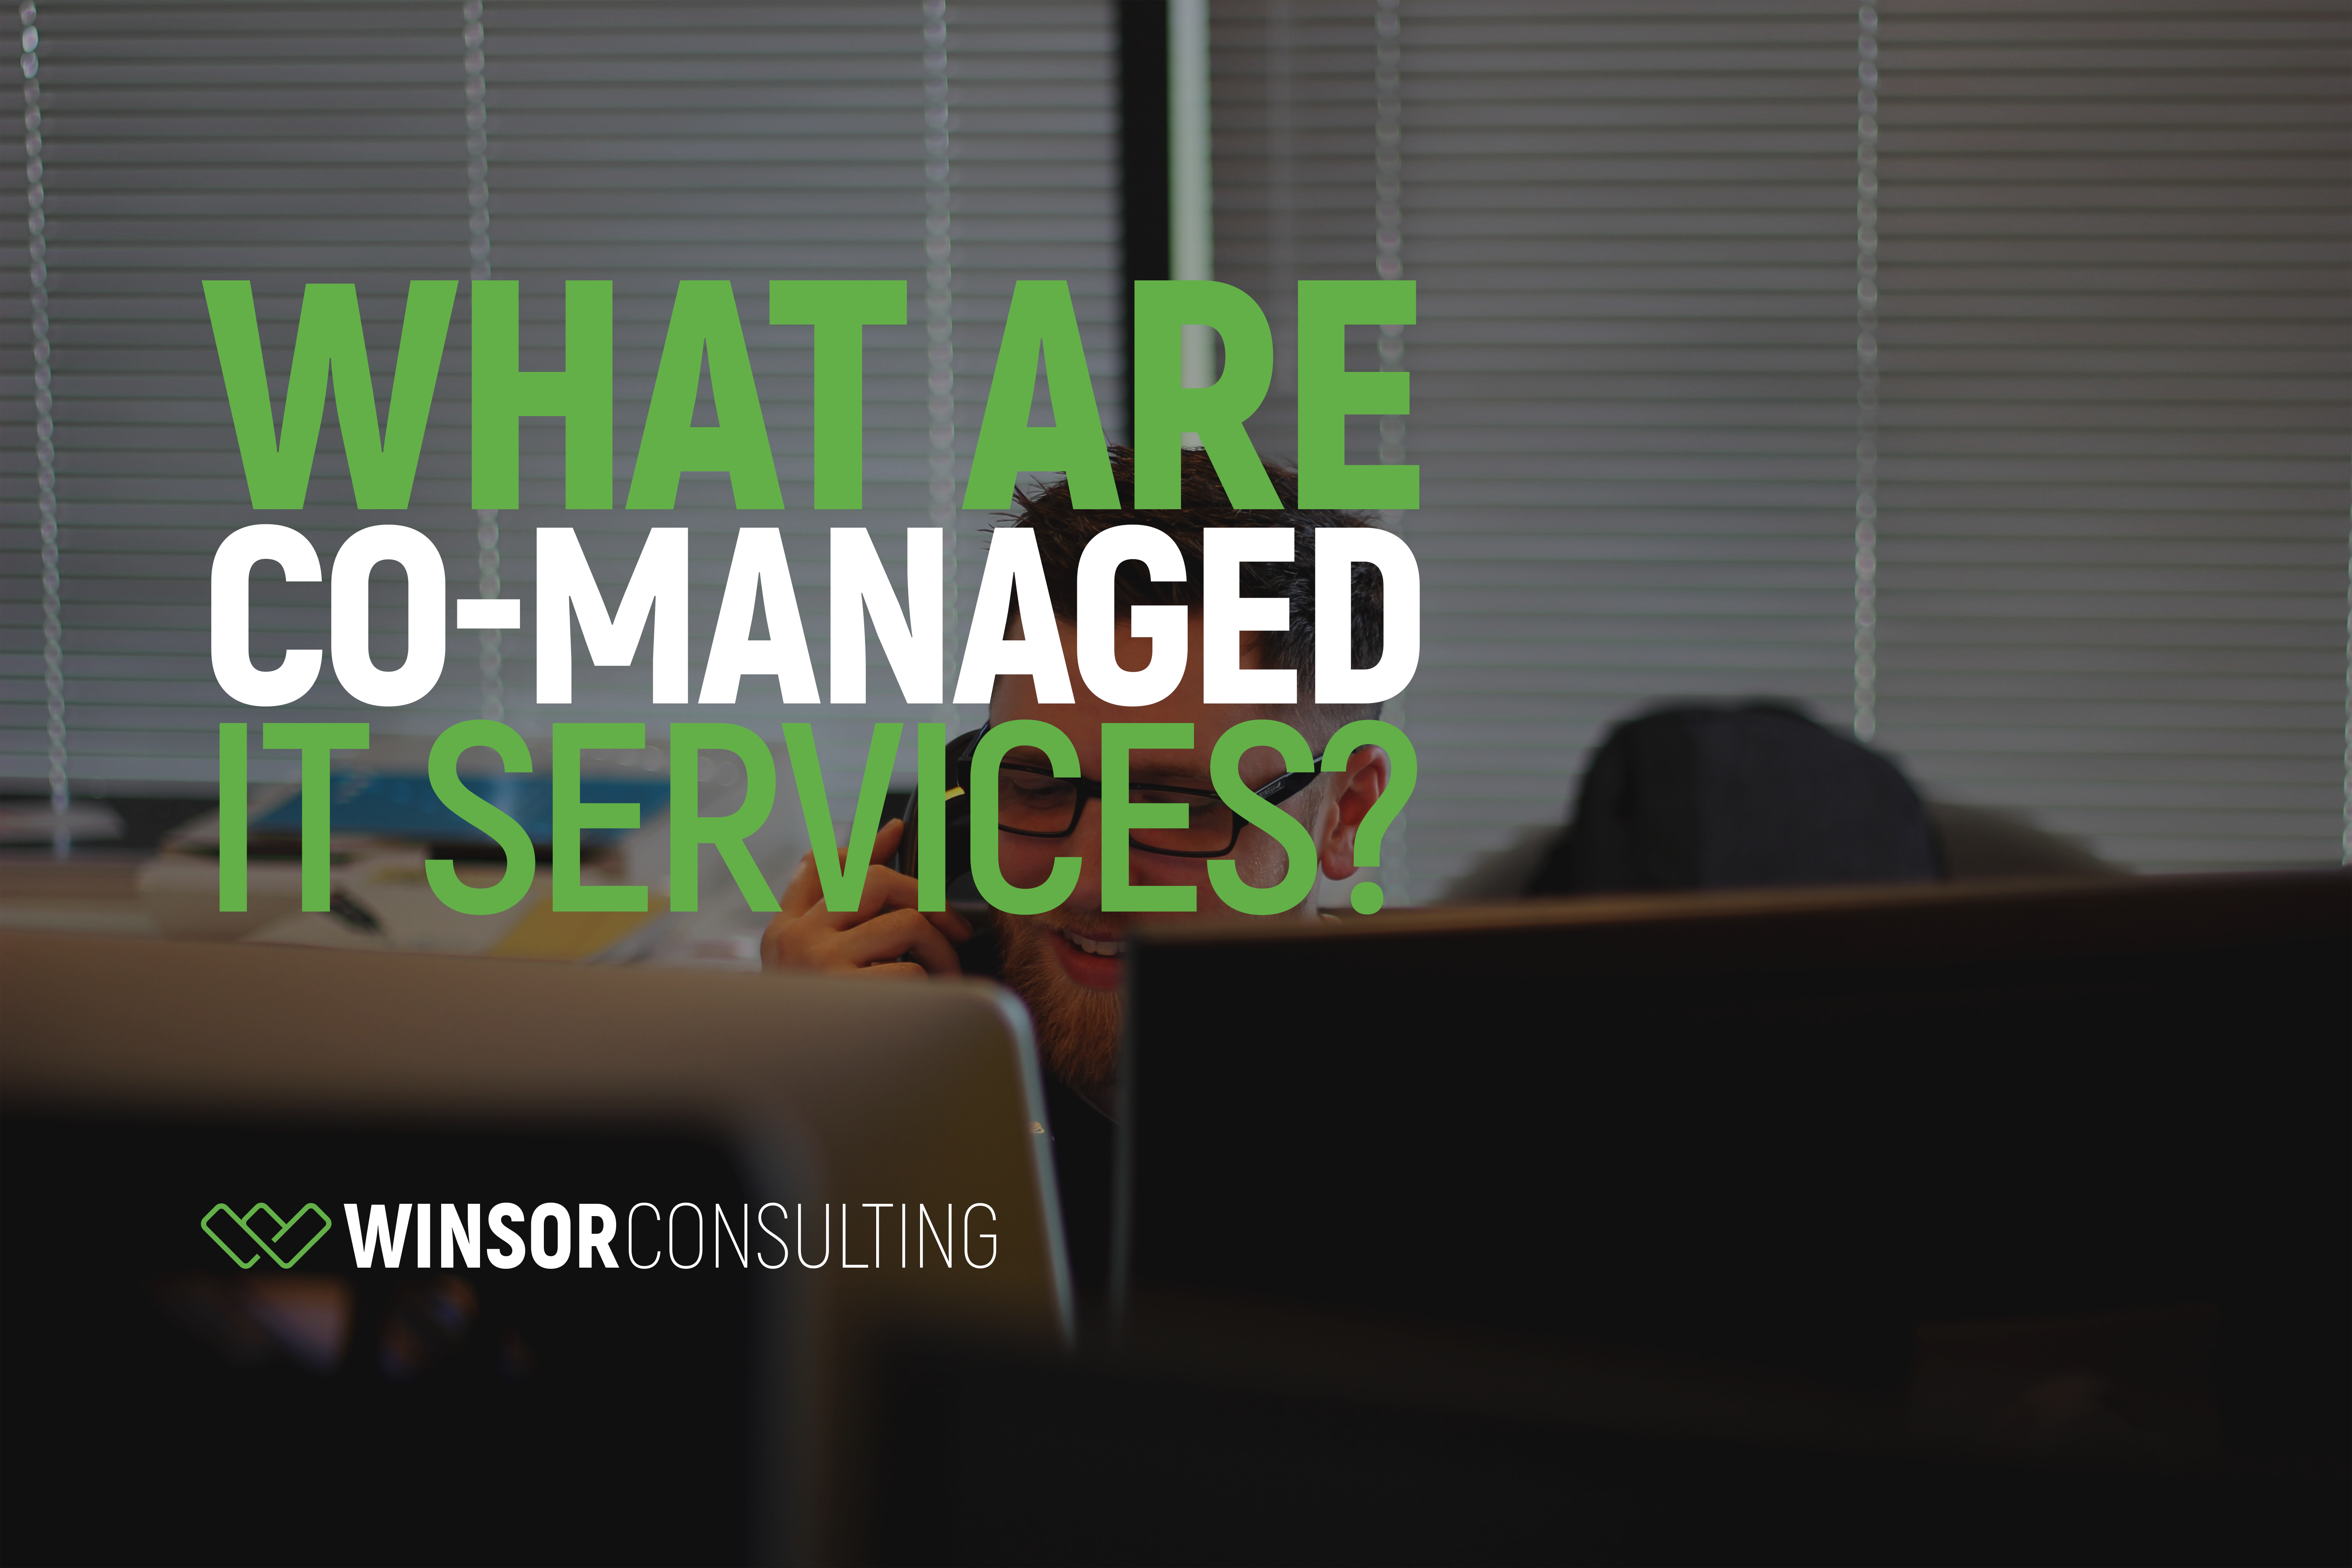 What Are Co-Managed IT Services?